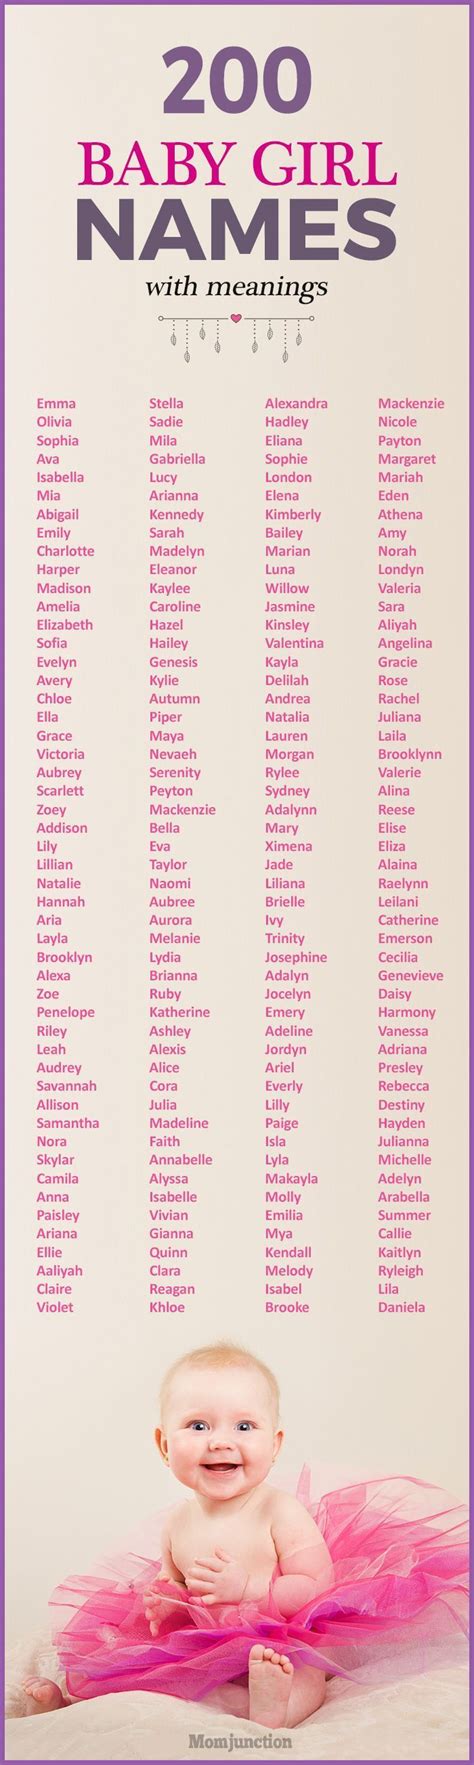 200 Baby Girl Names With Meanings Babygirltops Nombres De Bebes